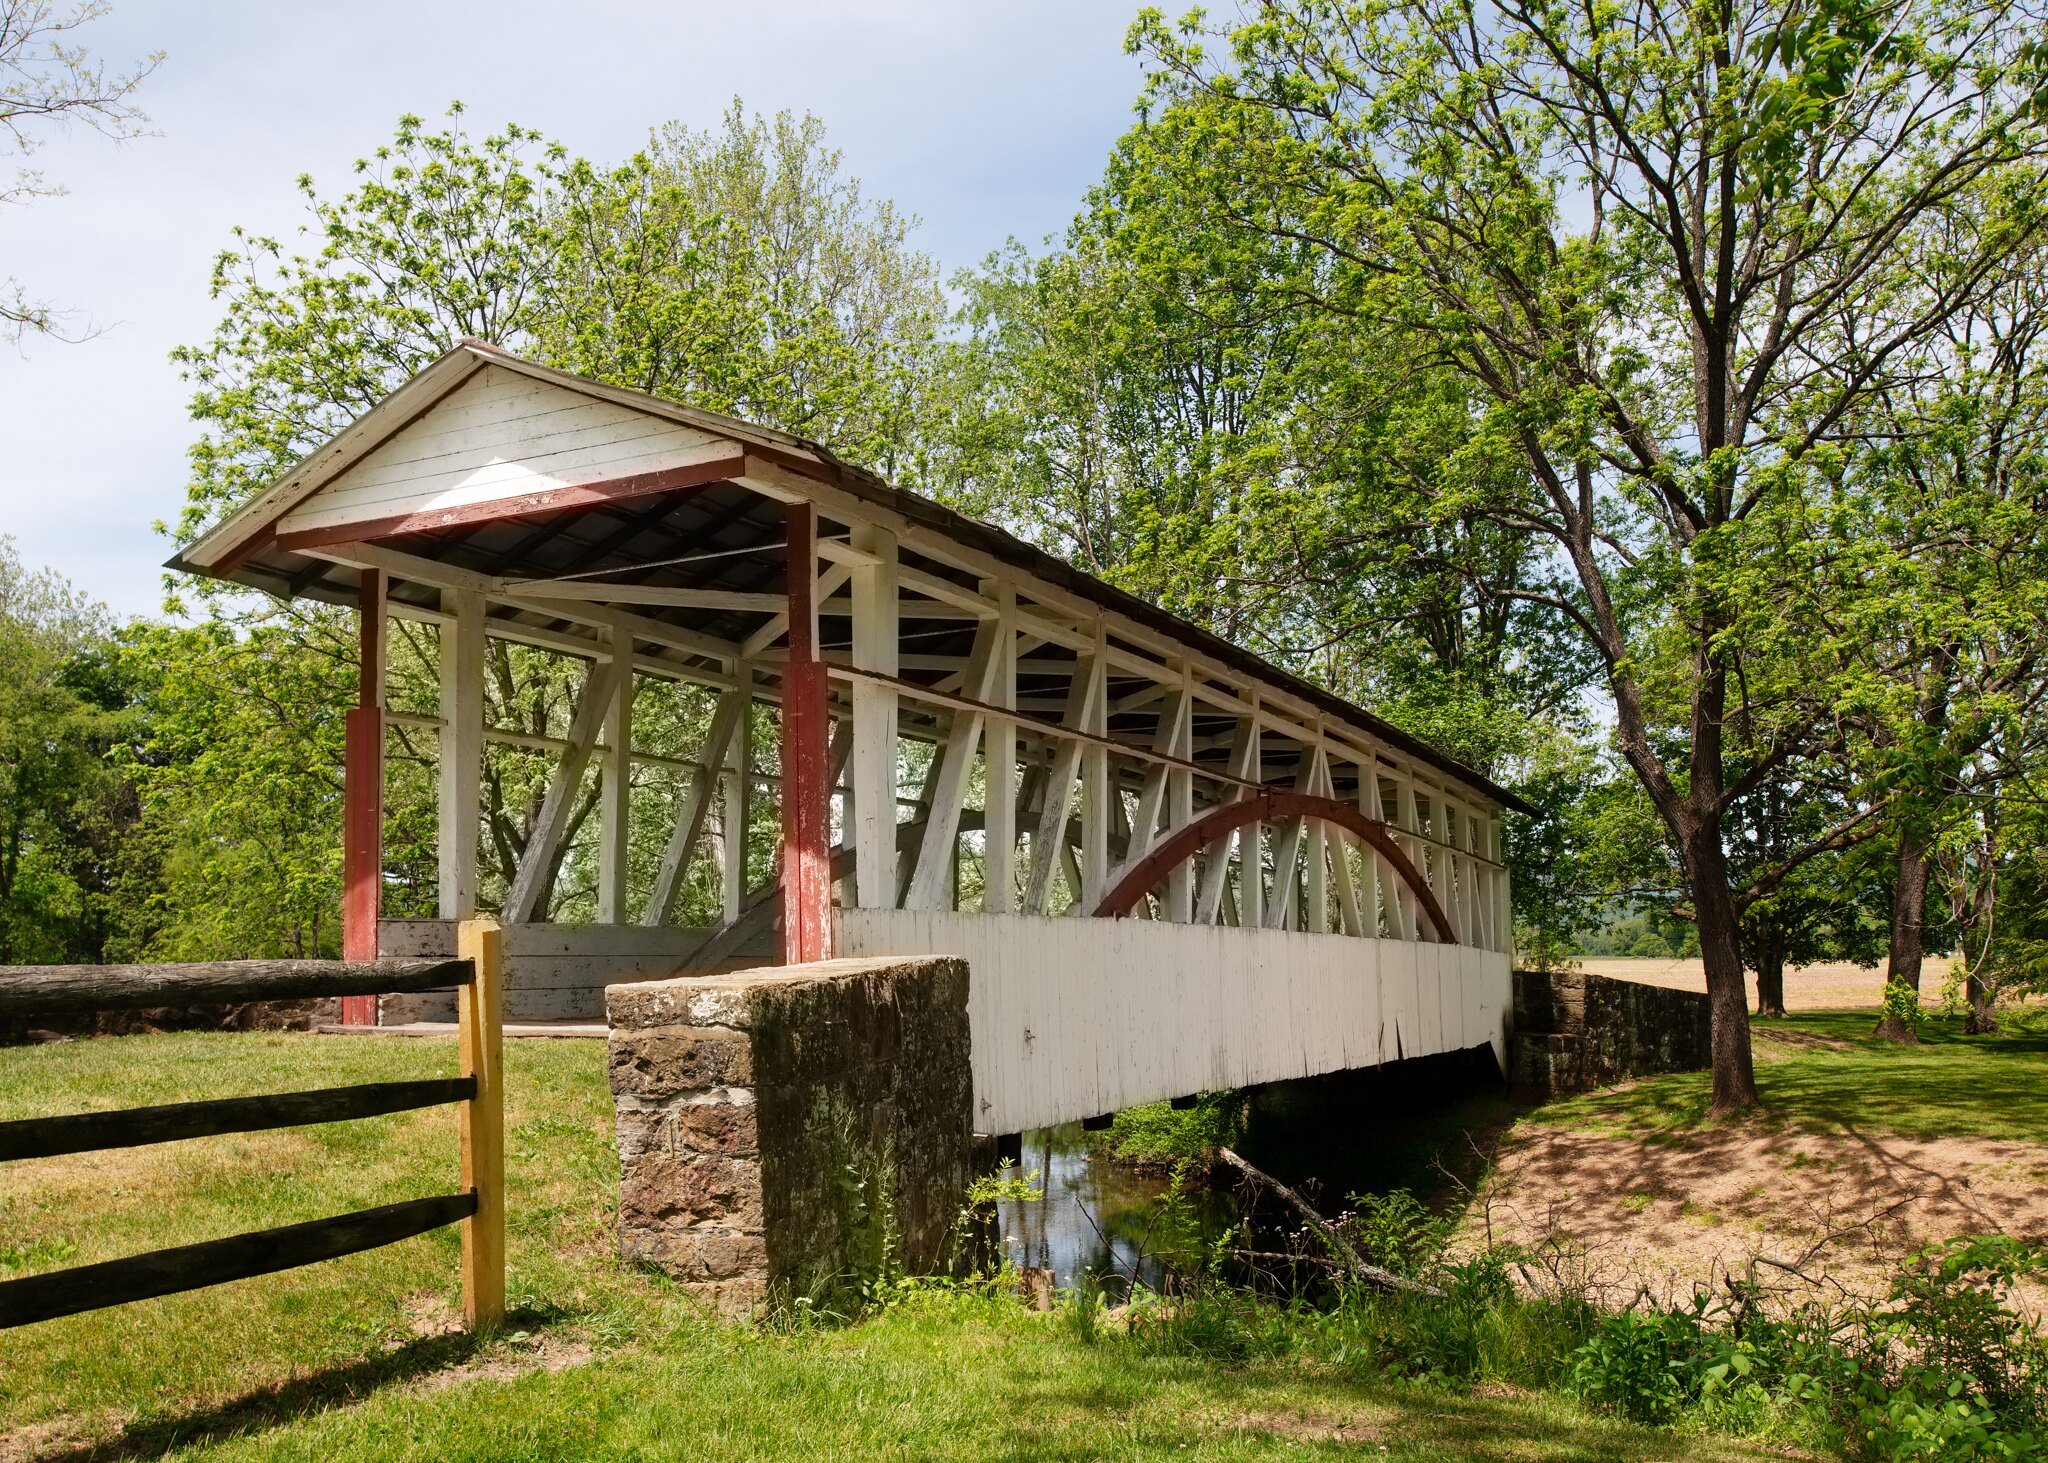  Dr. Kniseley Covered Bridge, Fisherstown, Bedford County, PA.  Built in 1867. 